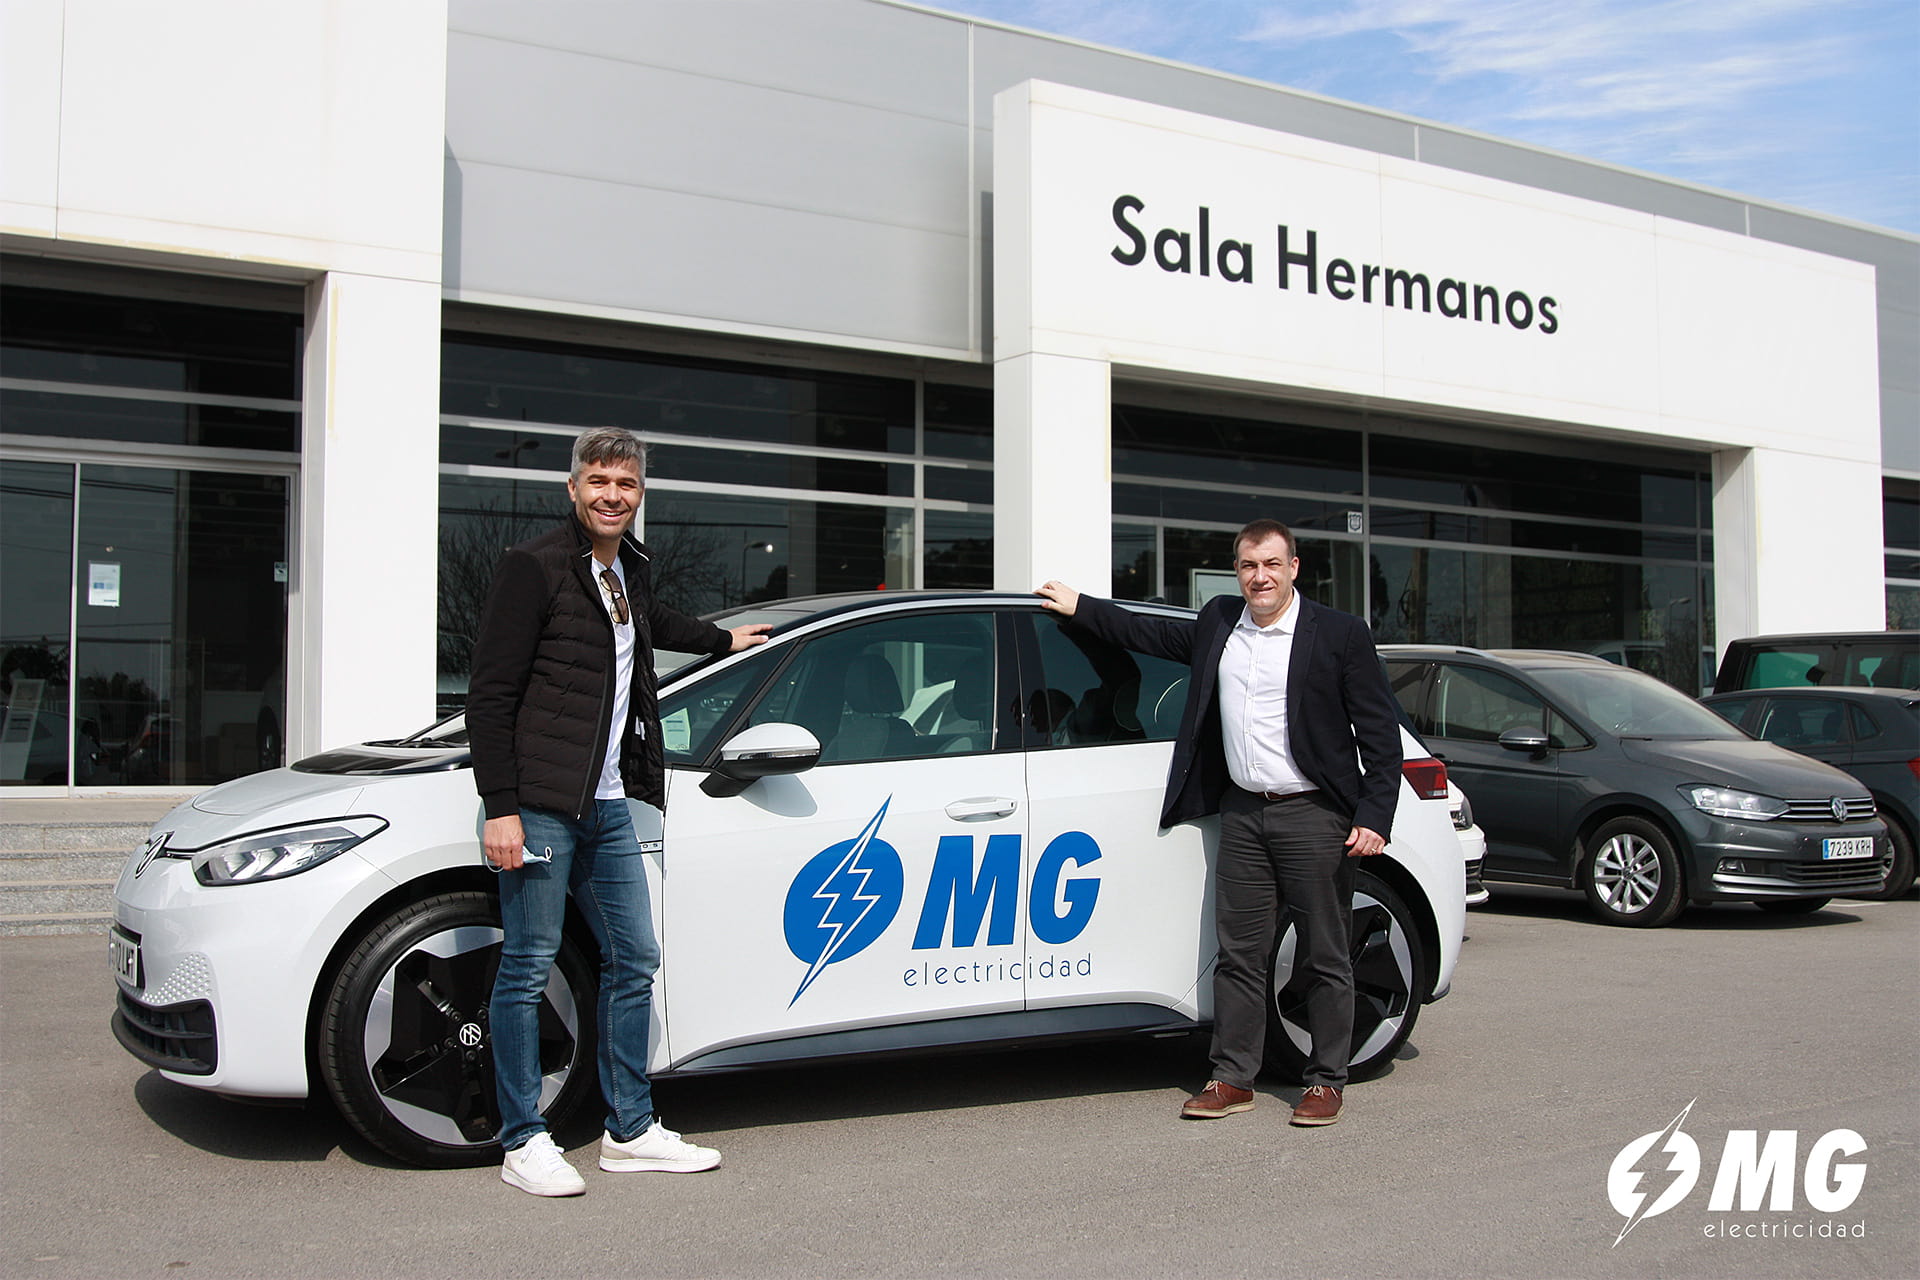 Delivery of the new electric vehicle for MG Electricidad's fleet..